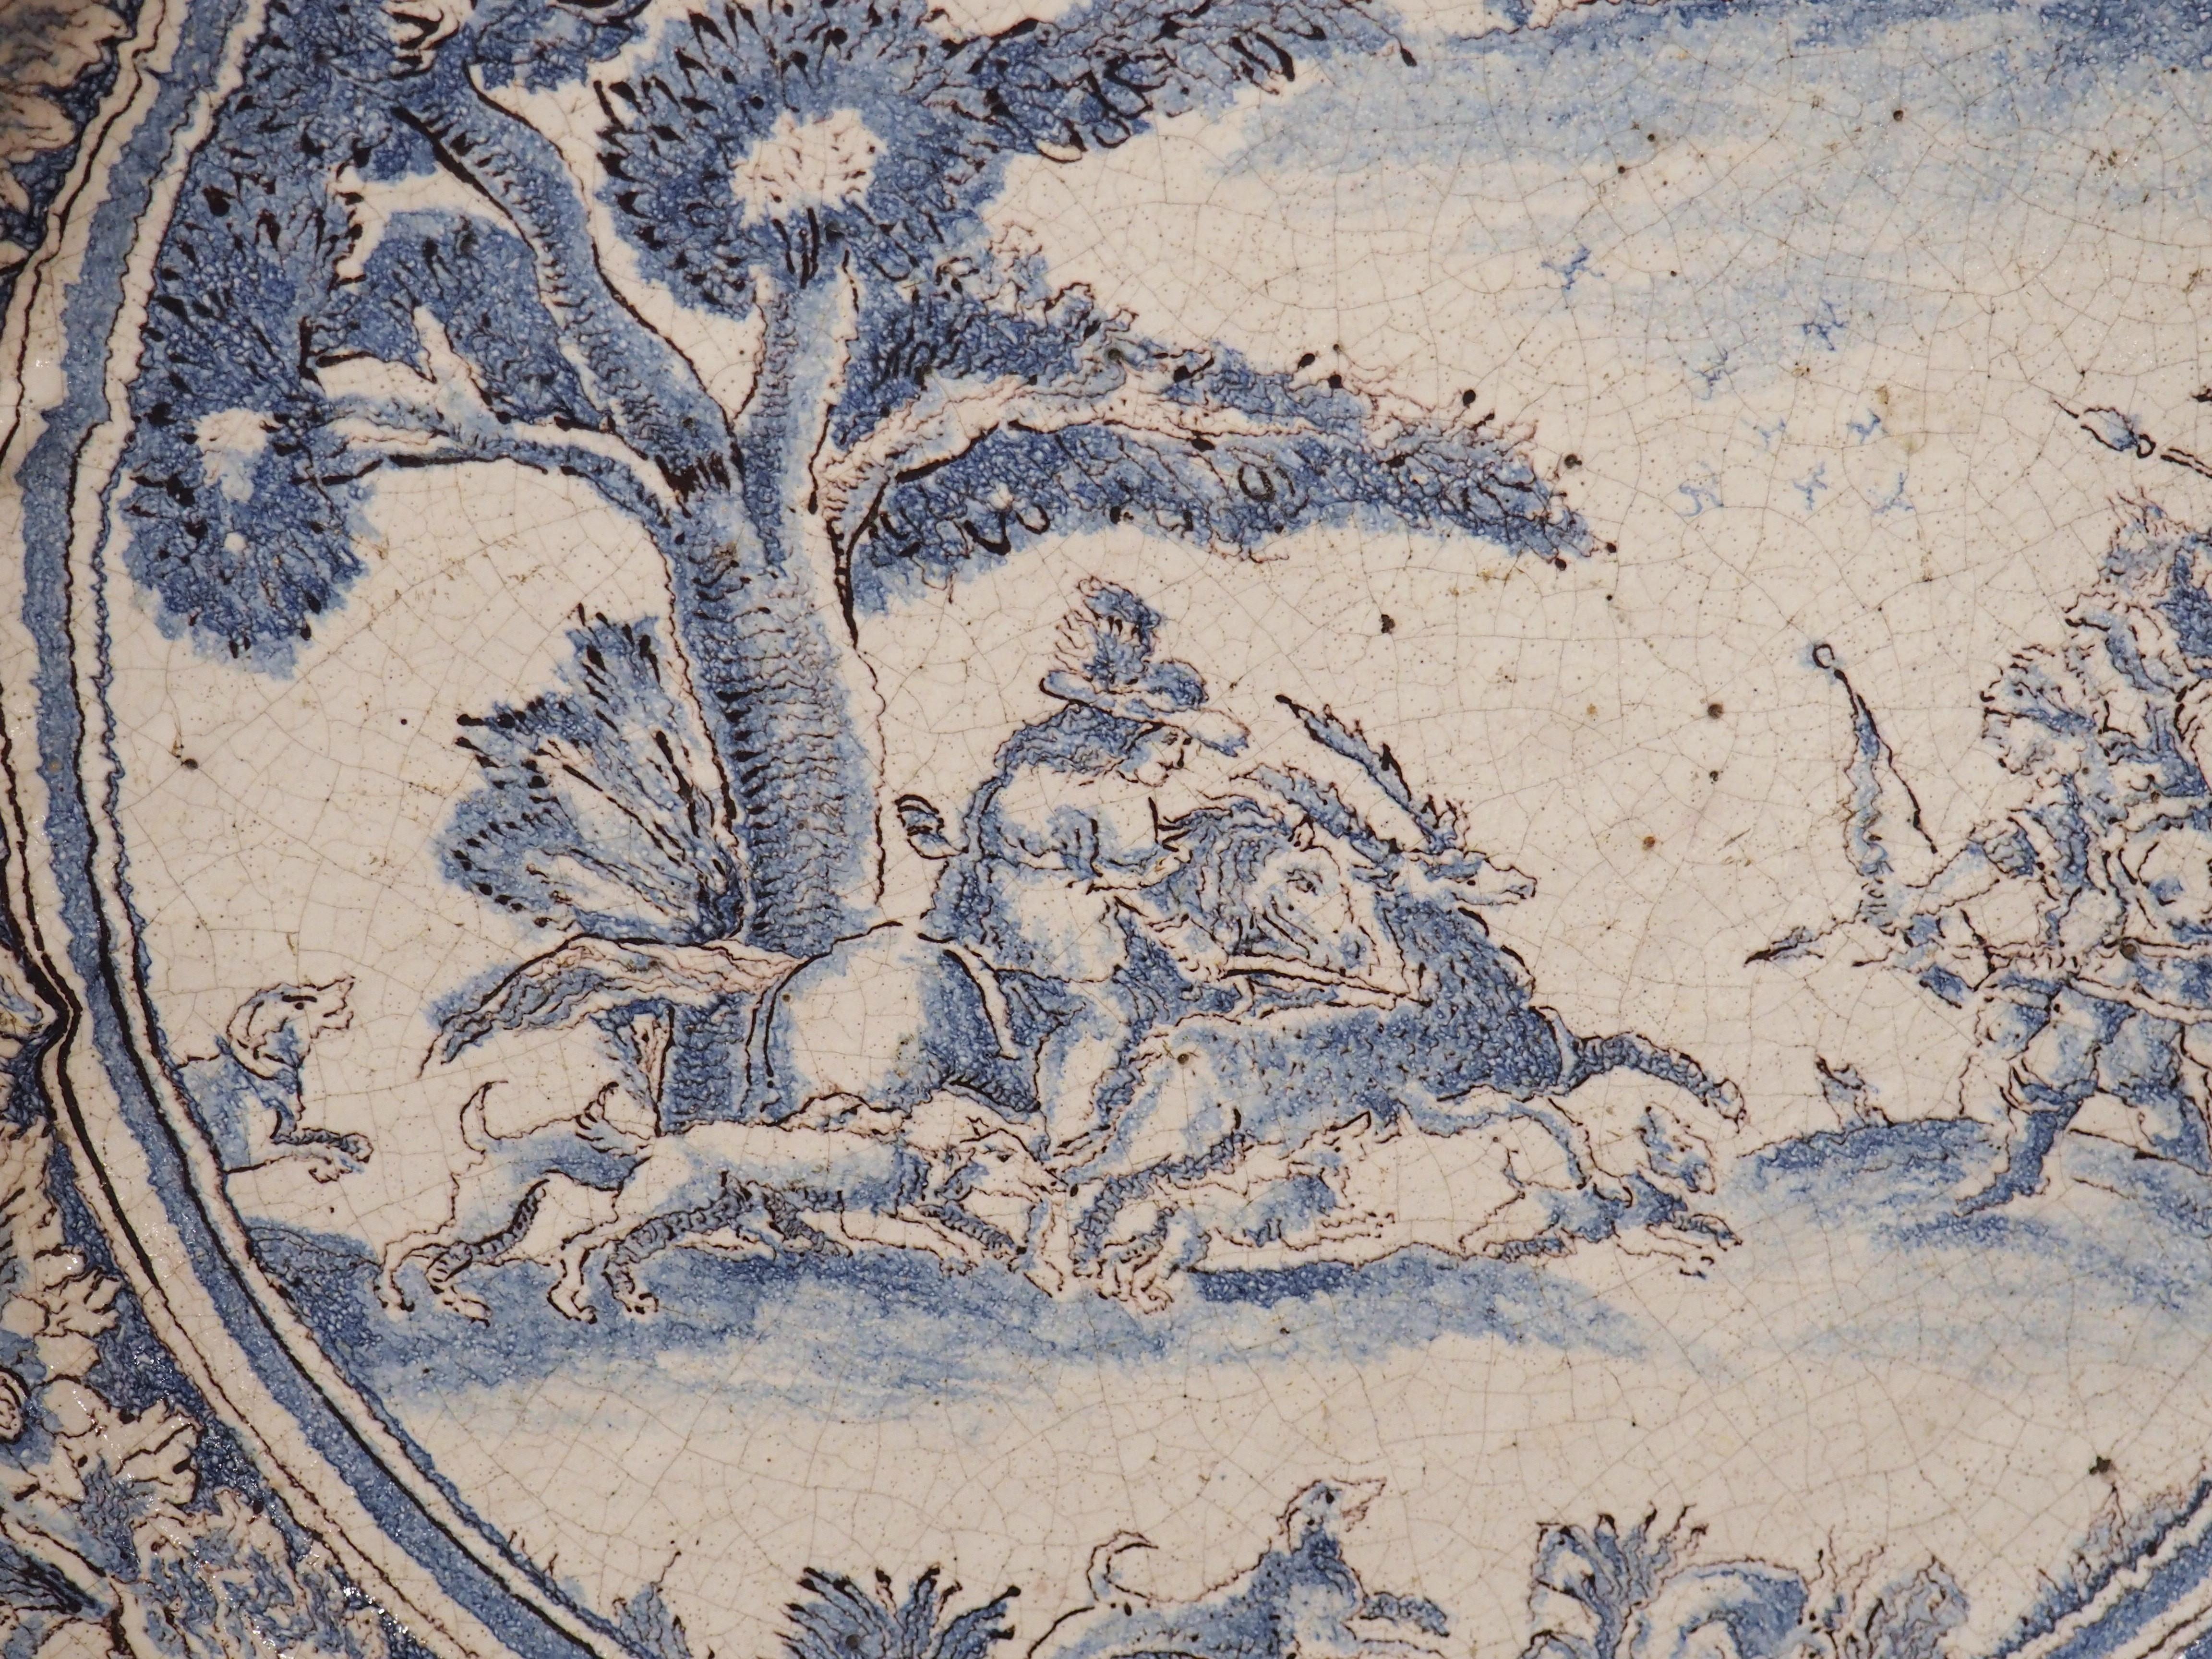 Hand-Painted Large 17th Century French Blue and White Faience Platter with Stag Hunt Scene